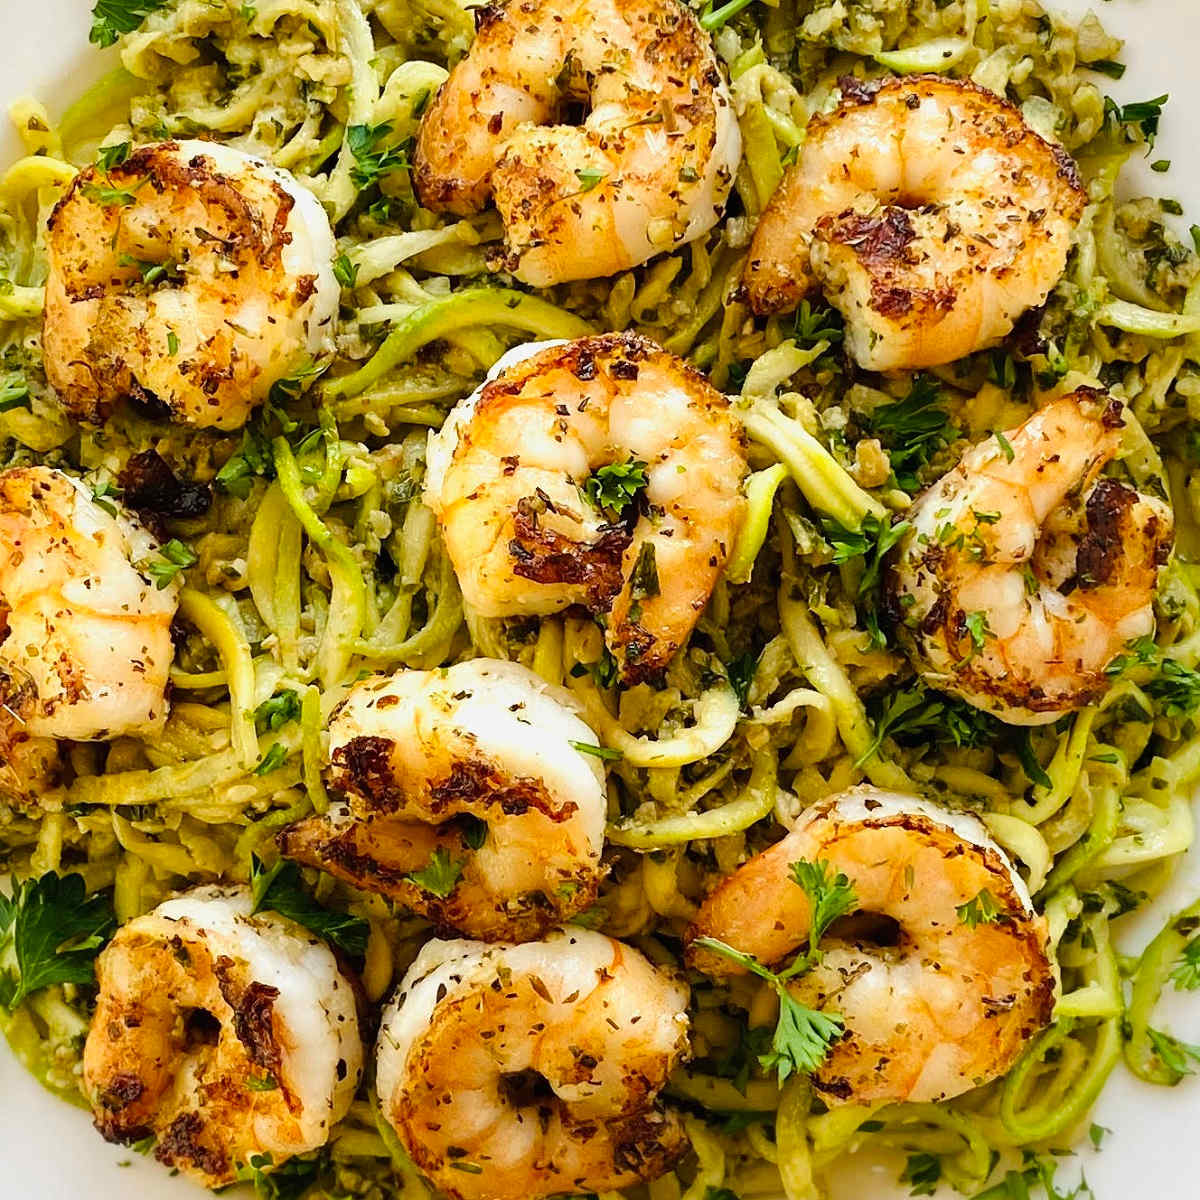 pesto without pine nuts on shrimp and zucchini noodles.